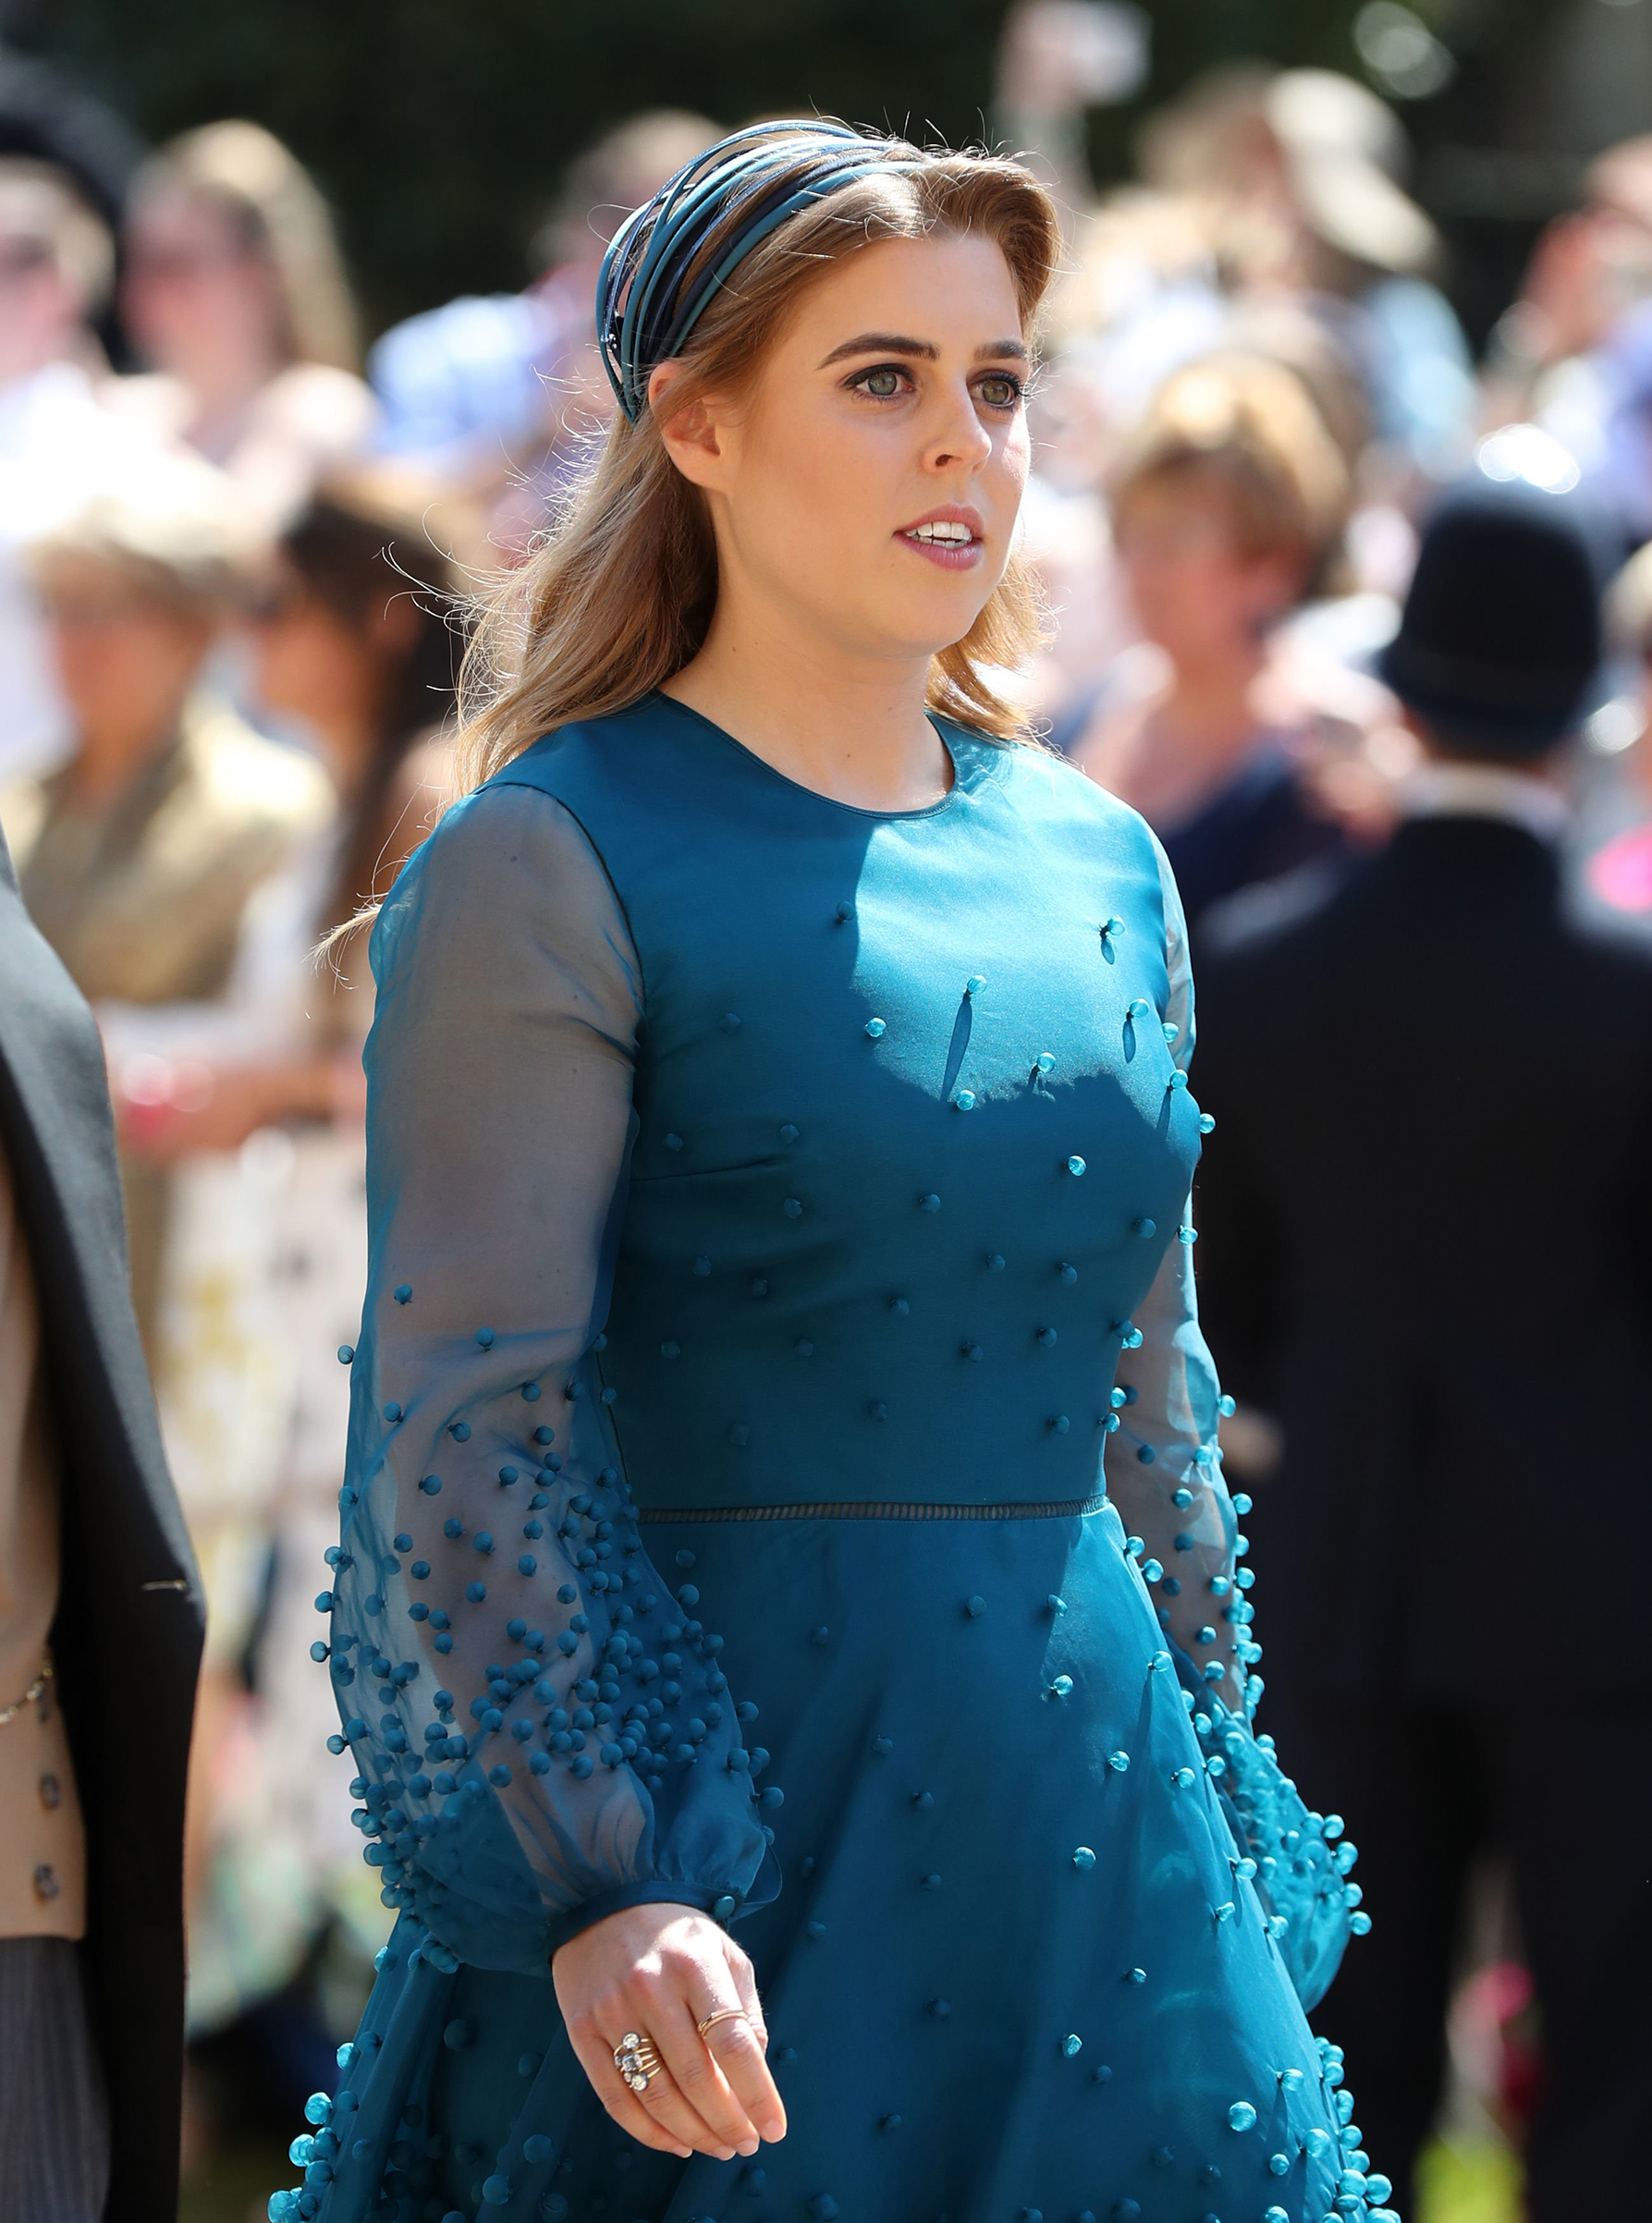 Princess Beatrice arrives at St George's Chapel at Windsor Castle before the wedding of Prince Harry to Meghan Markle on May 19, 2018. (Gareth Fuller—WPA Pool/Getty Images)